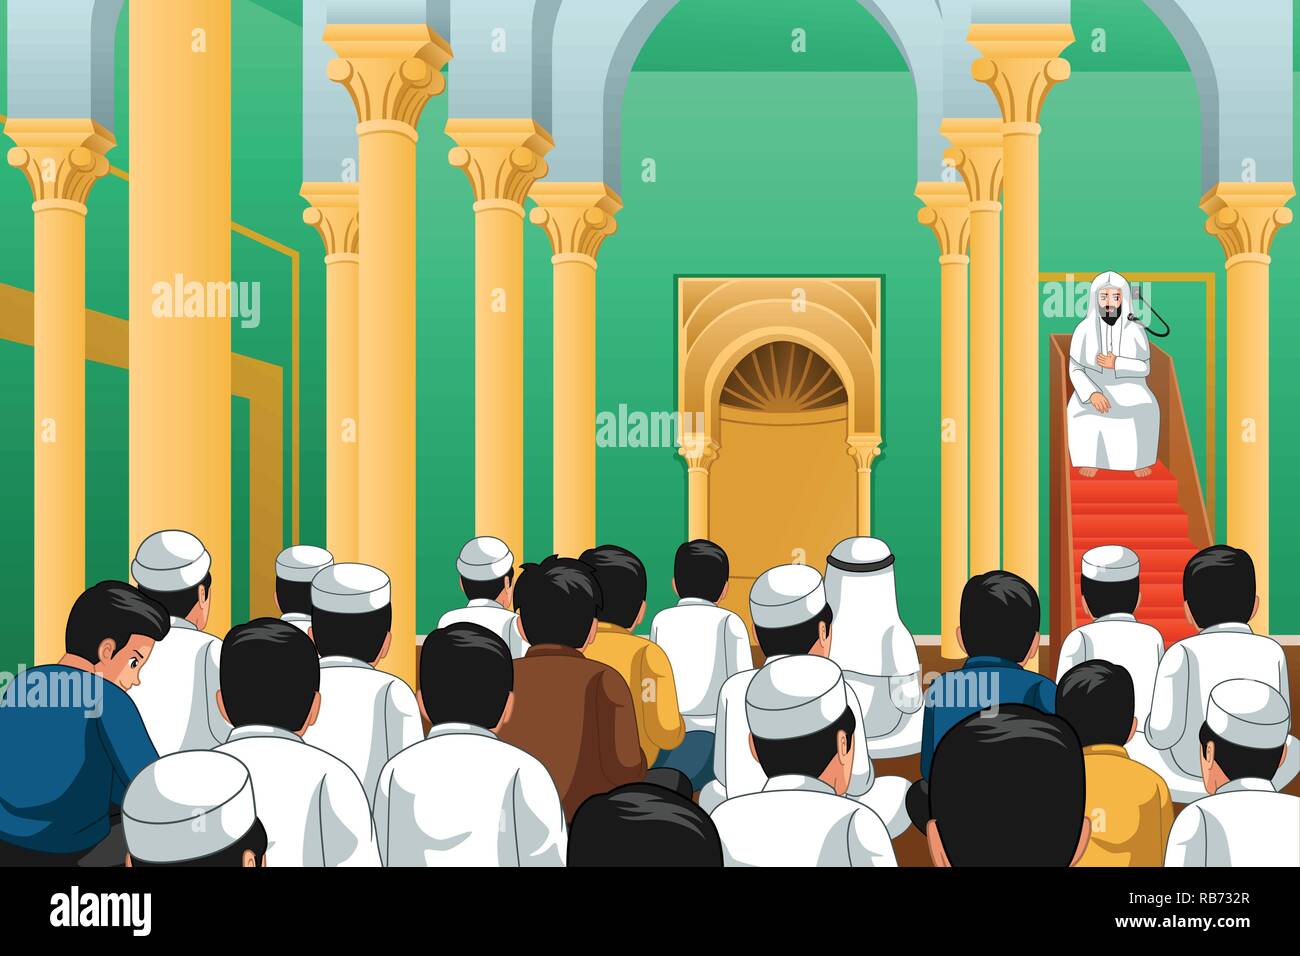 A vector illustration of Muslims Praying in a Mosque Stock Vector